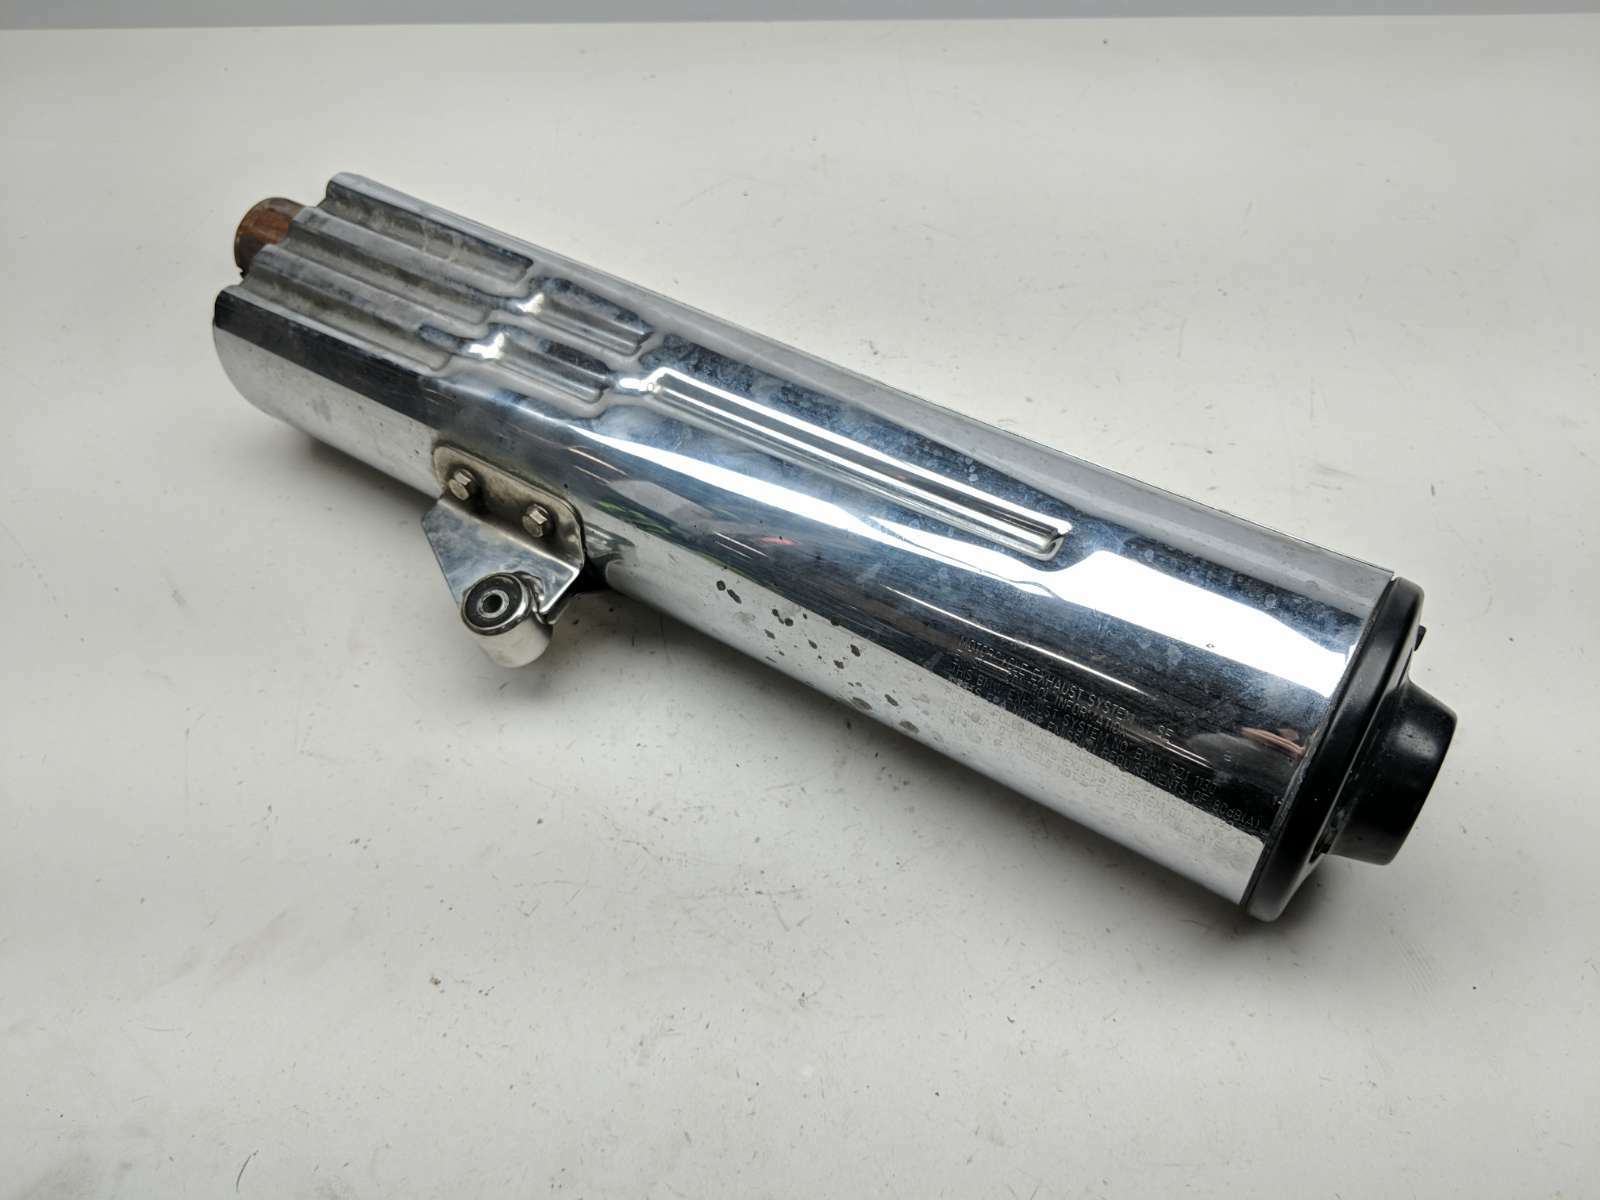 02 BMW R1150GS R1150 GS Exhaust Pipe Muffler Slip-On Silencer Can